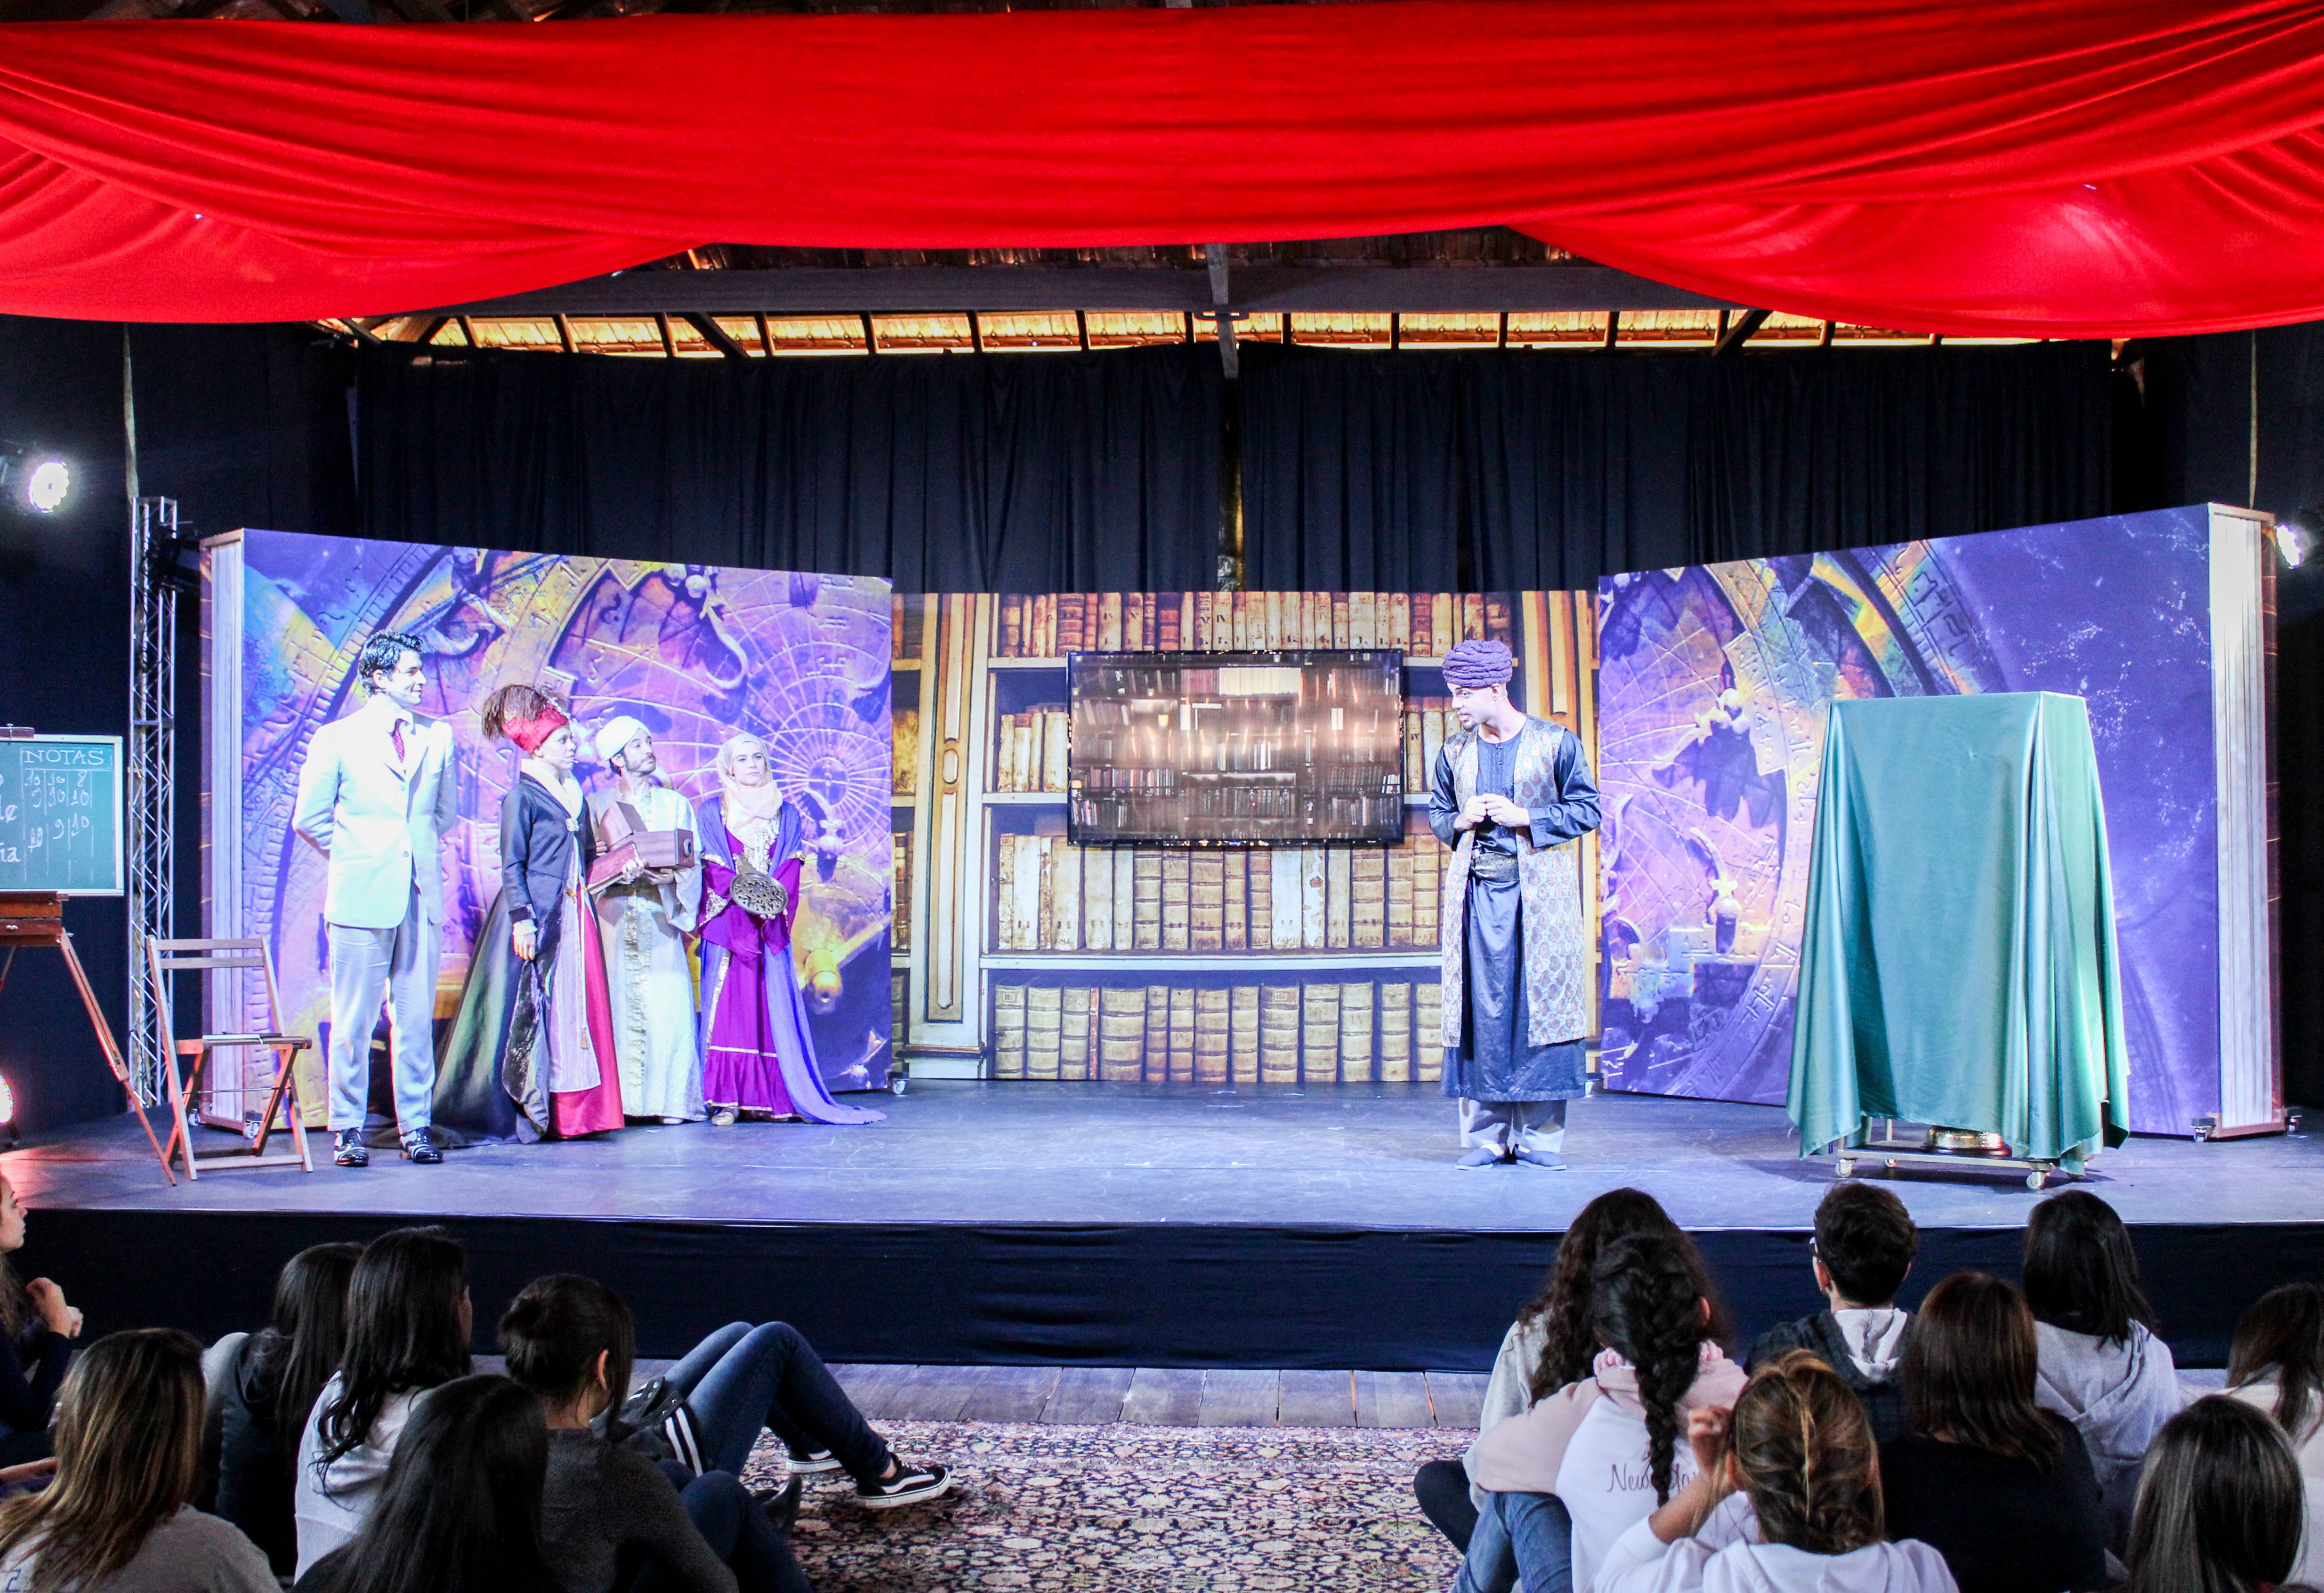 A company of actors on stage for an educational production of "1001 Inventions: Science from Muslim Civilisations" in Brazil.